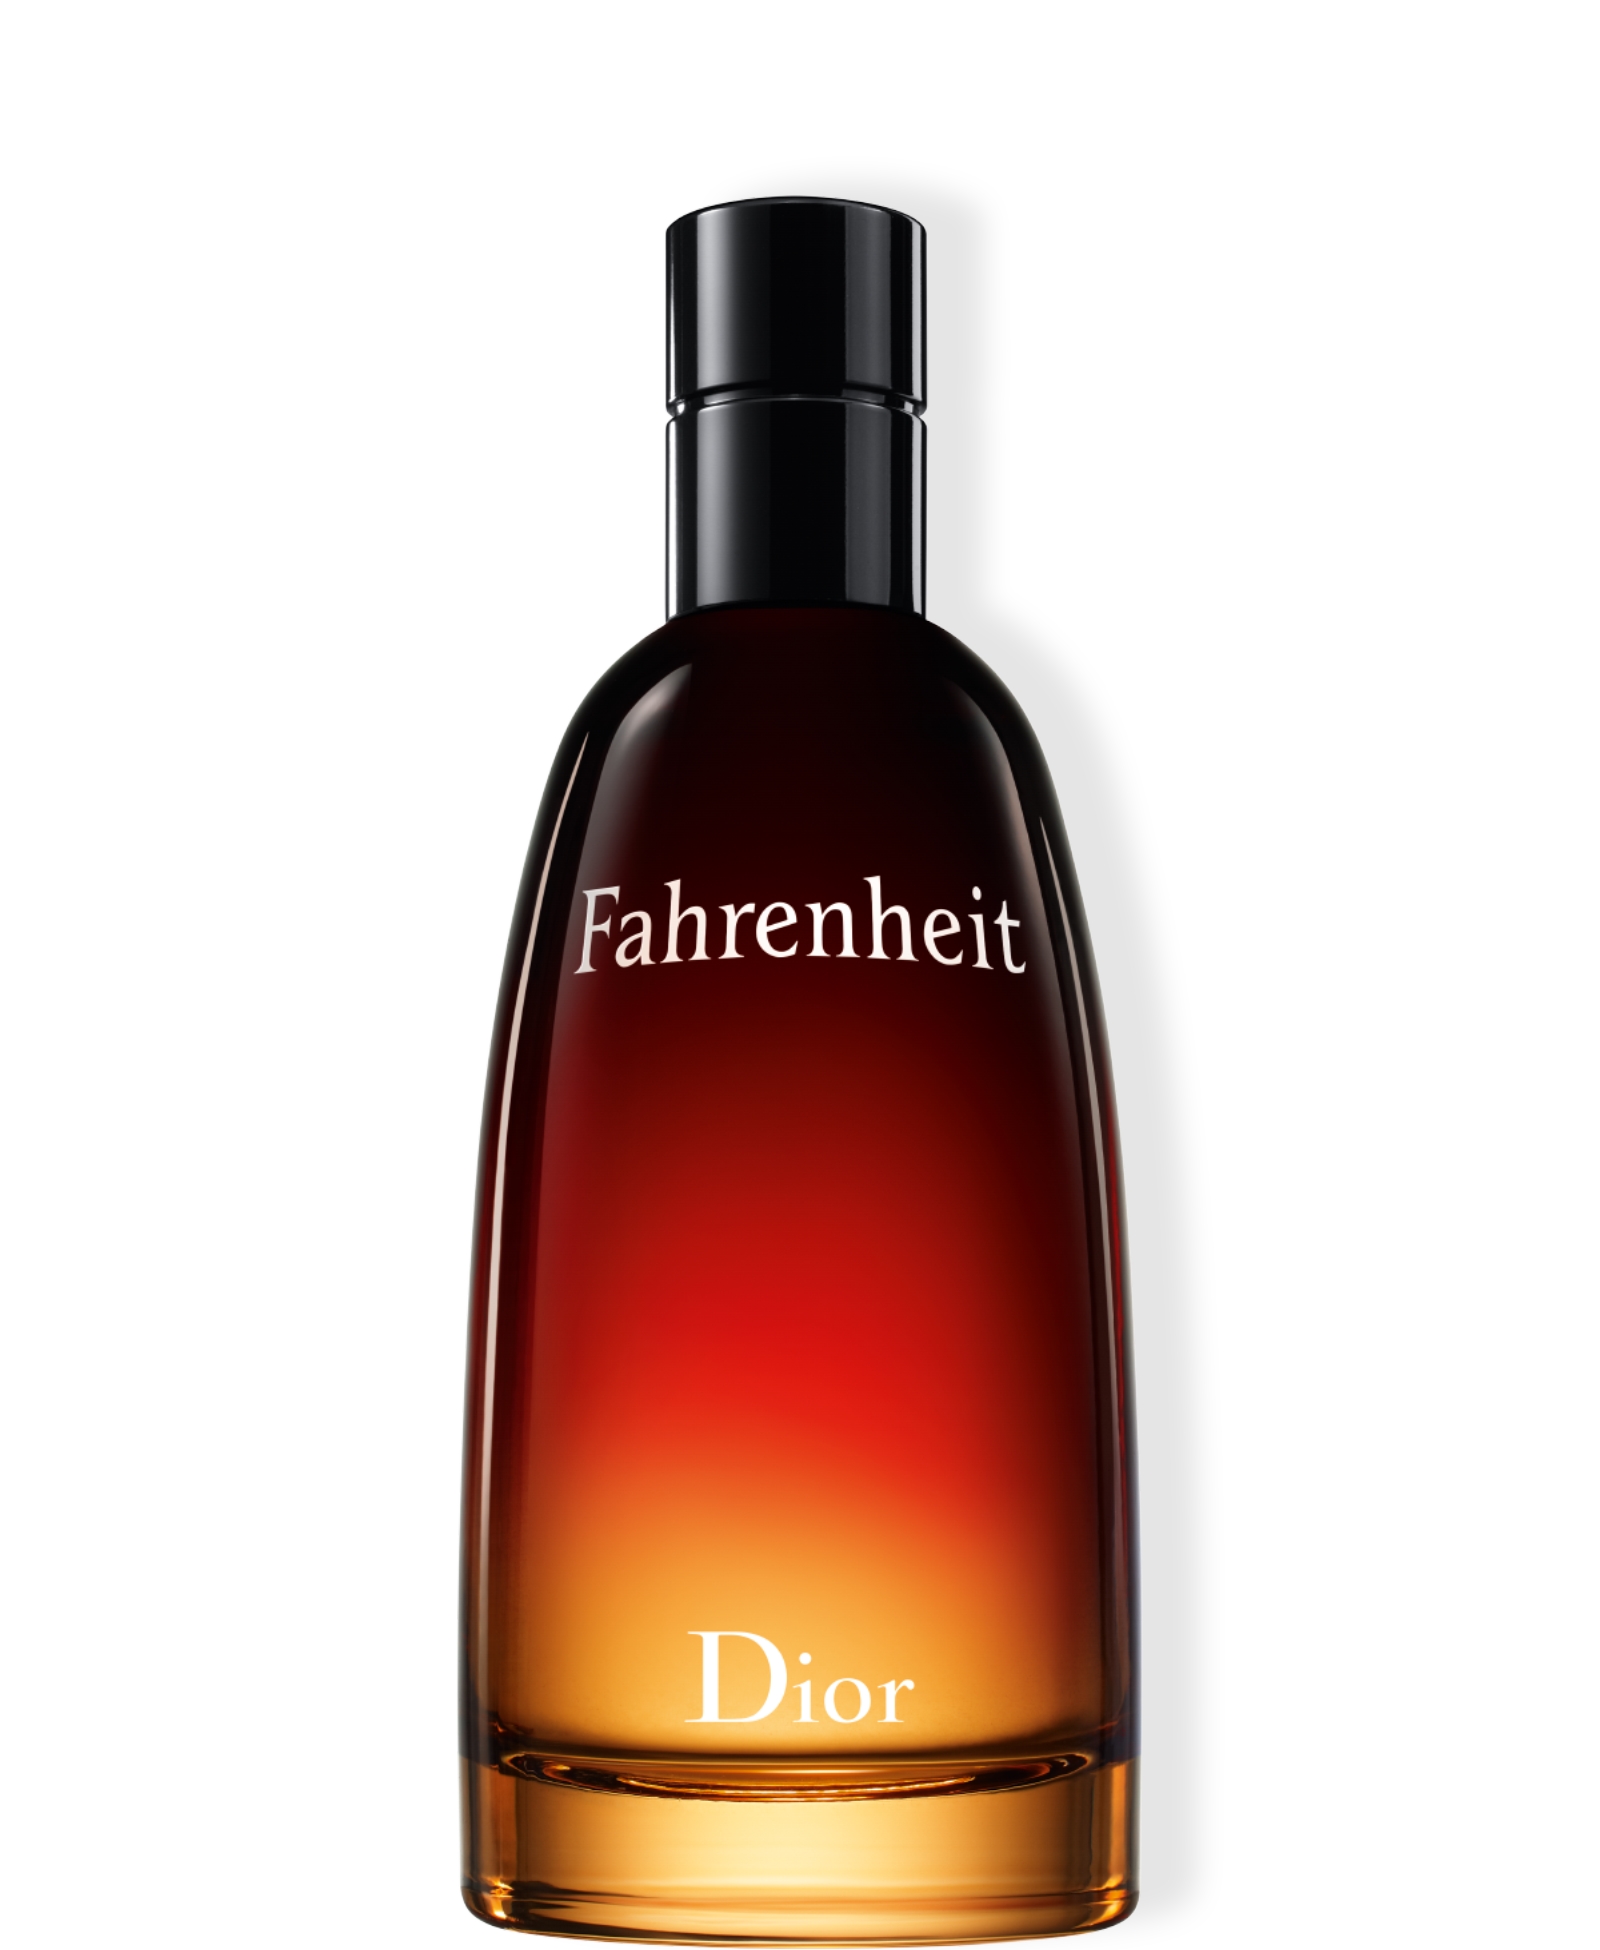  Fahrenheit After Shave